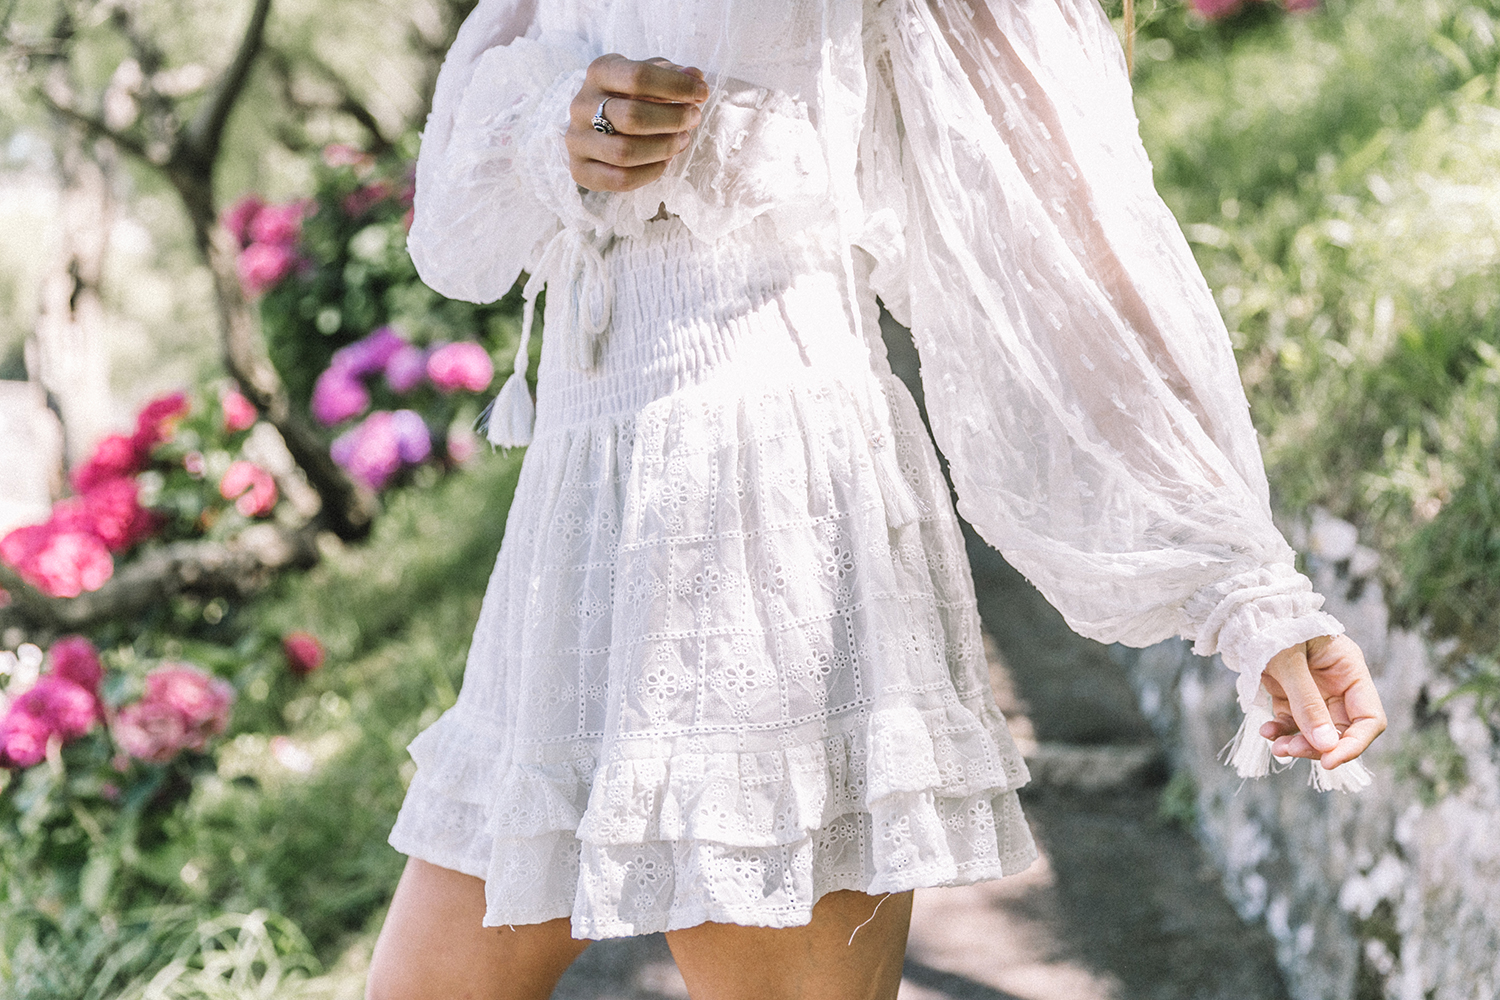 White_Outfit-Denim_Jacket-Lack_Of_Color_Hat-Outfit-Biarritz-Levis-Live_In_Levis-Street_Style-Summer-Boho_Skirt-Collage_Vintage-14